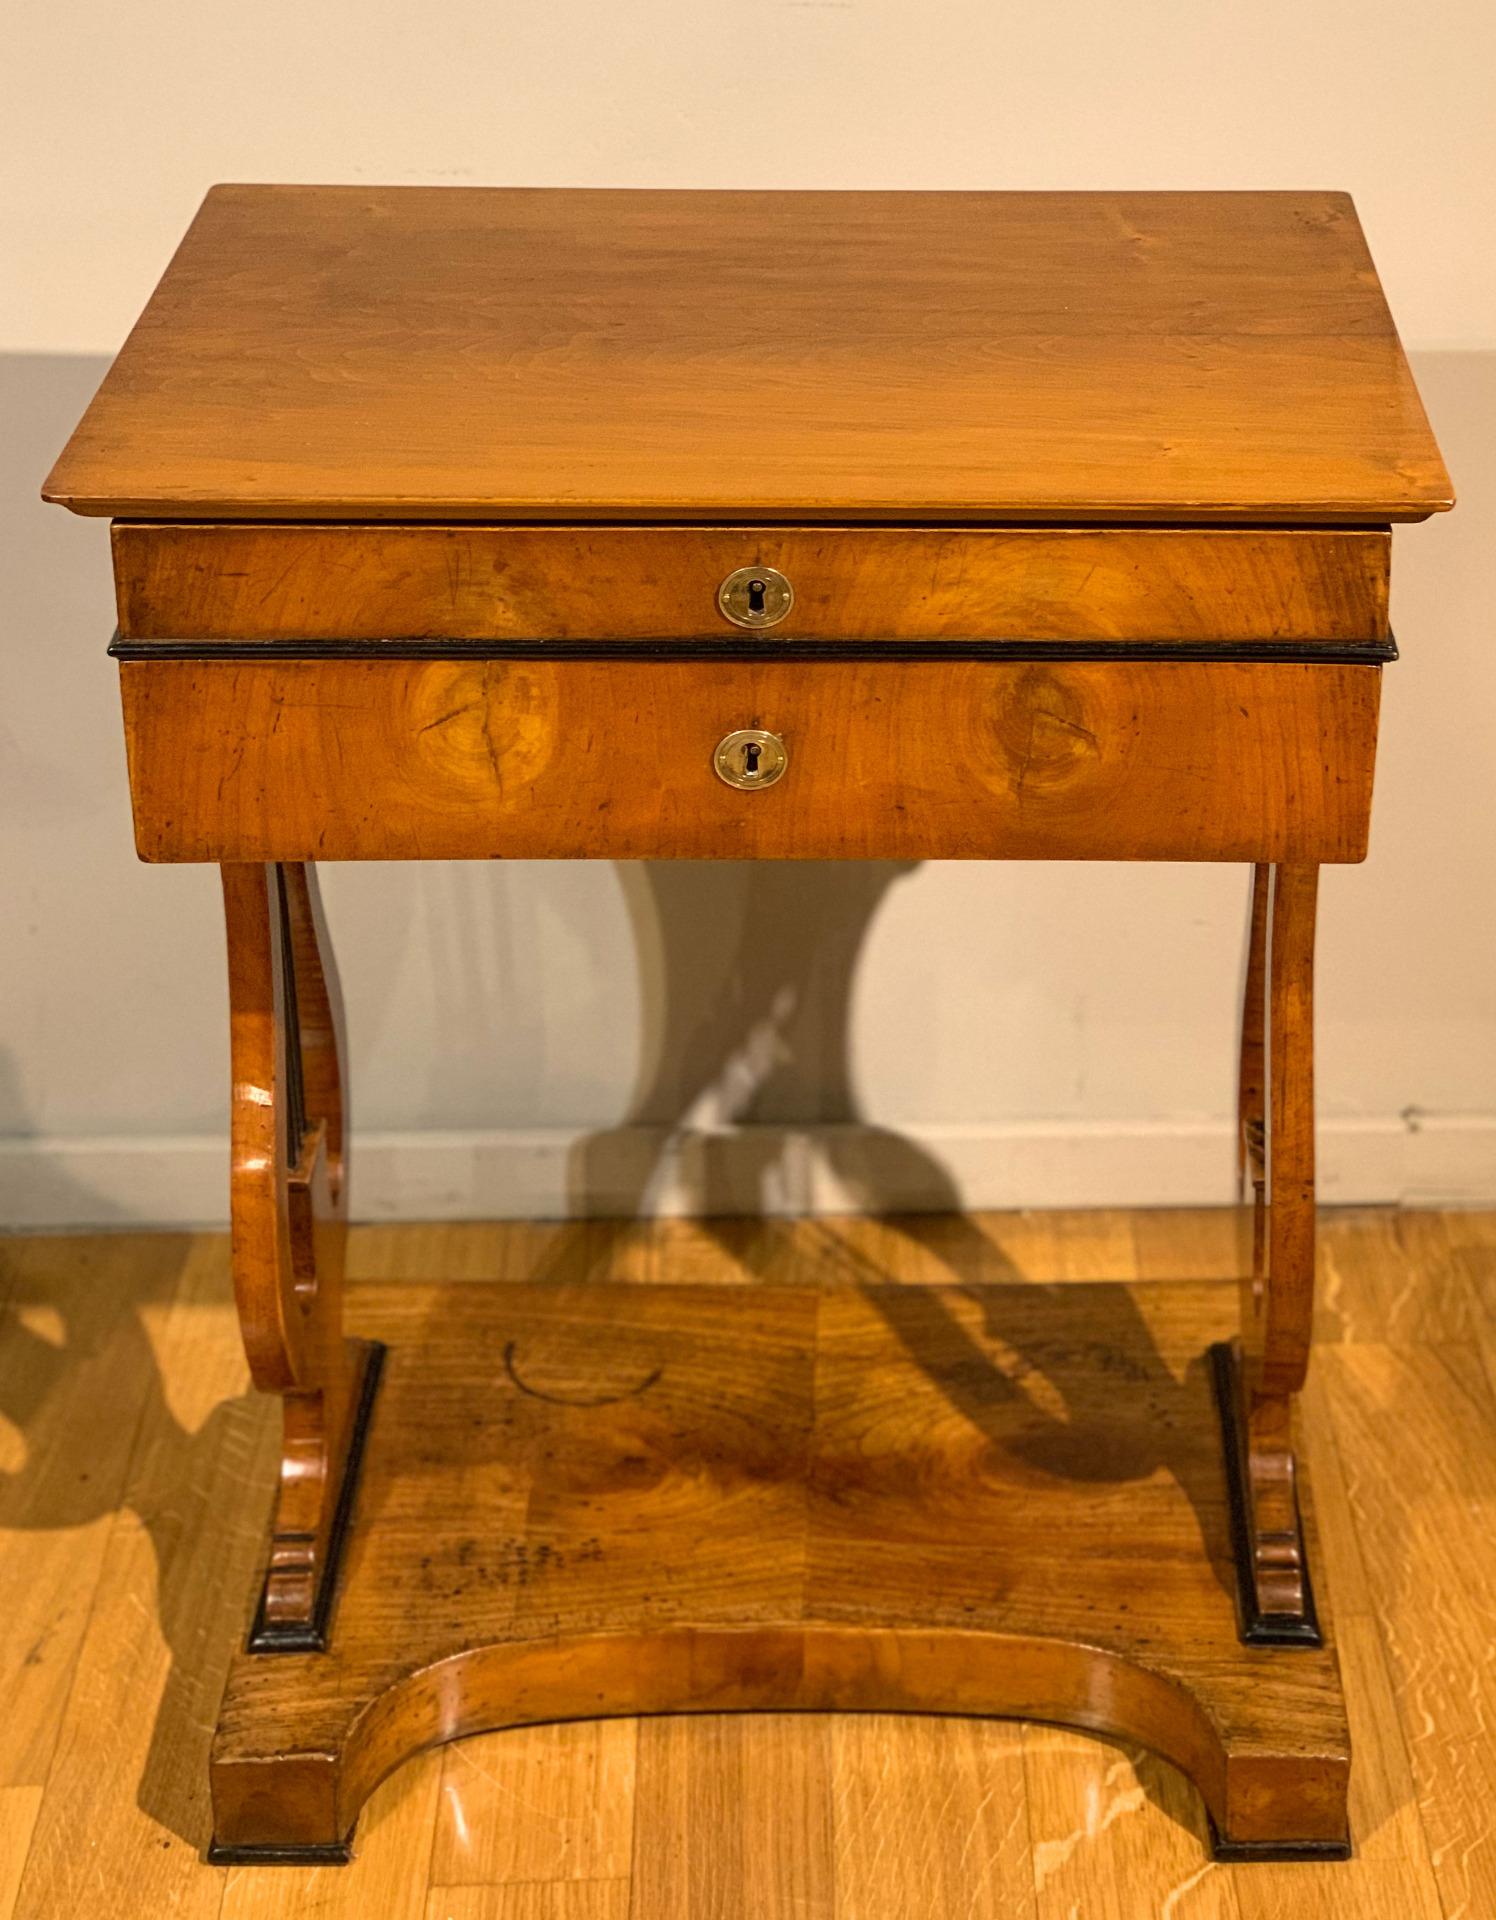 Elegant work table in solid cherry wood with lyre legs with ebonized ropes and gilded bronze studs on the ends. The asymmetrical base is of notable beauty, it was useful for allowing the insertion of a stool or for the legs of the lady who